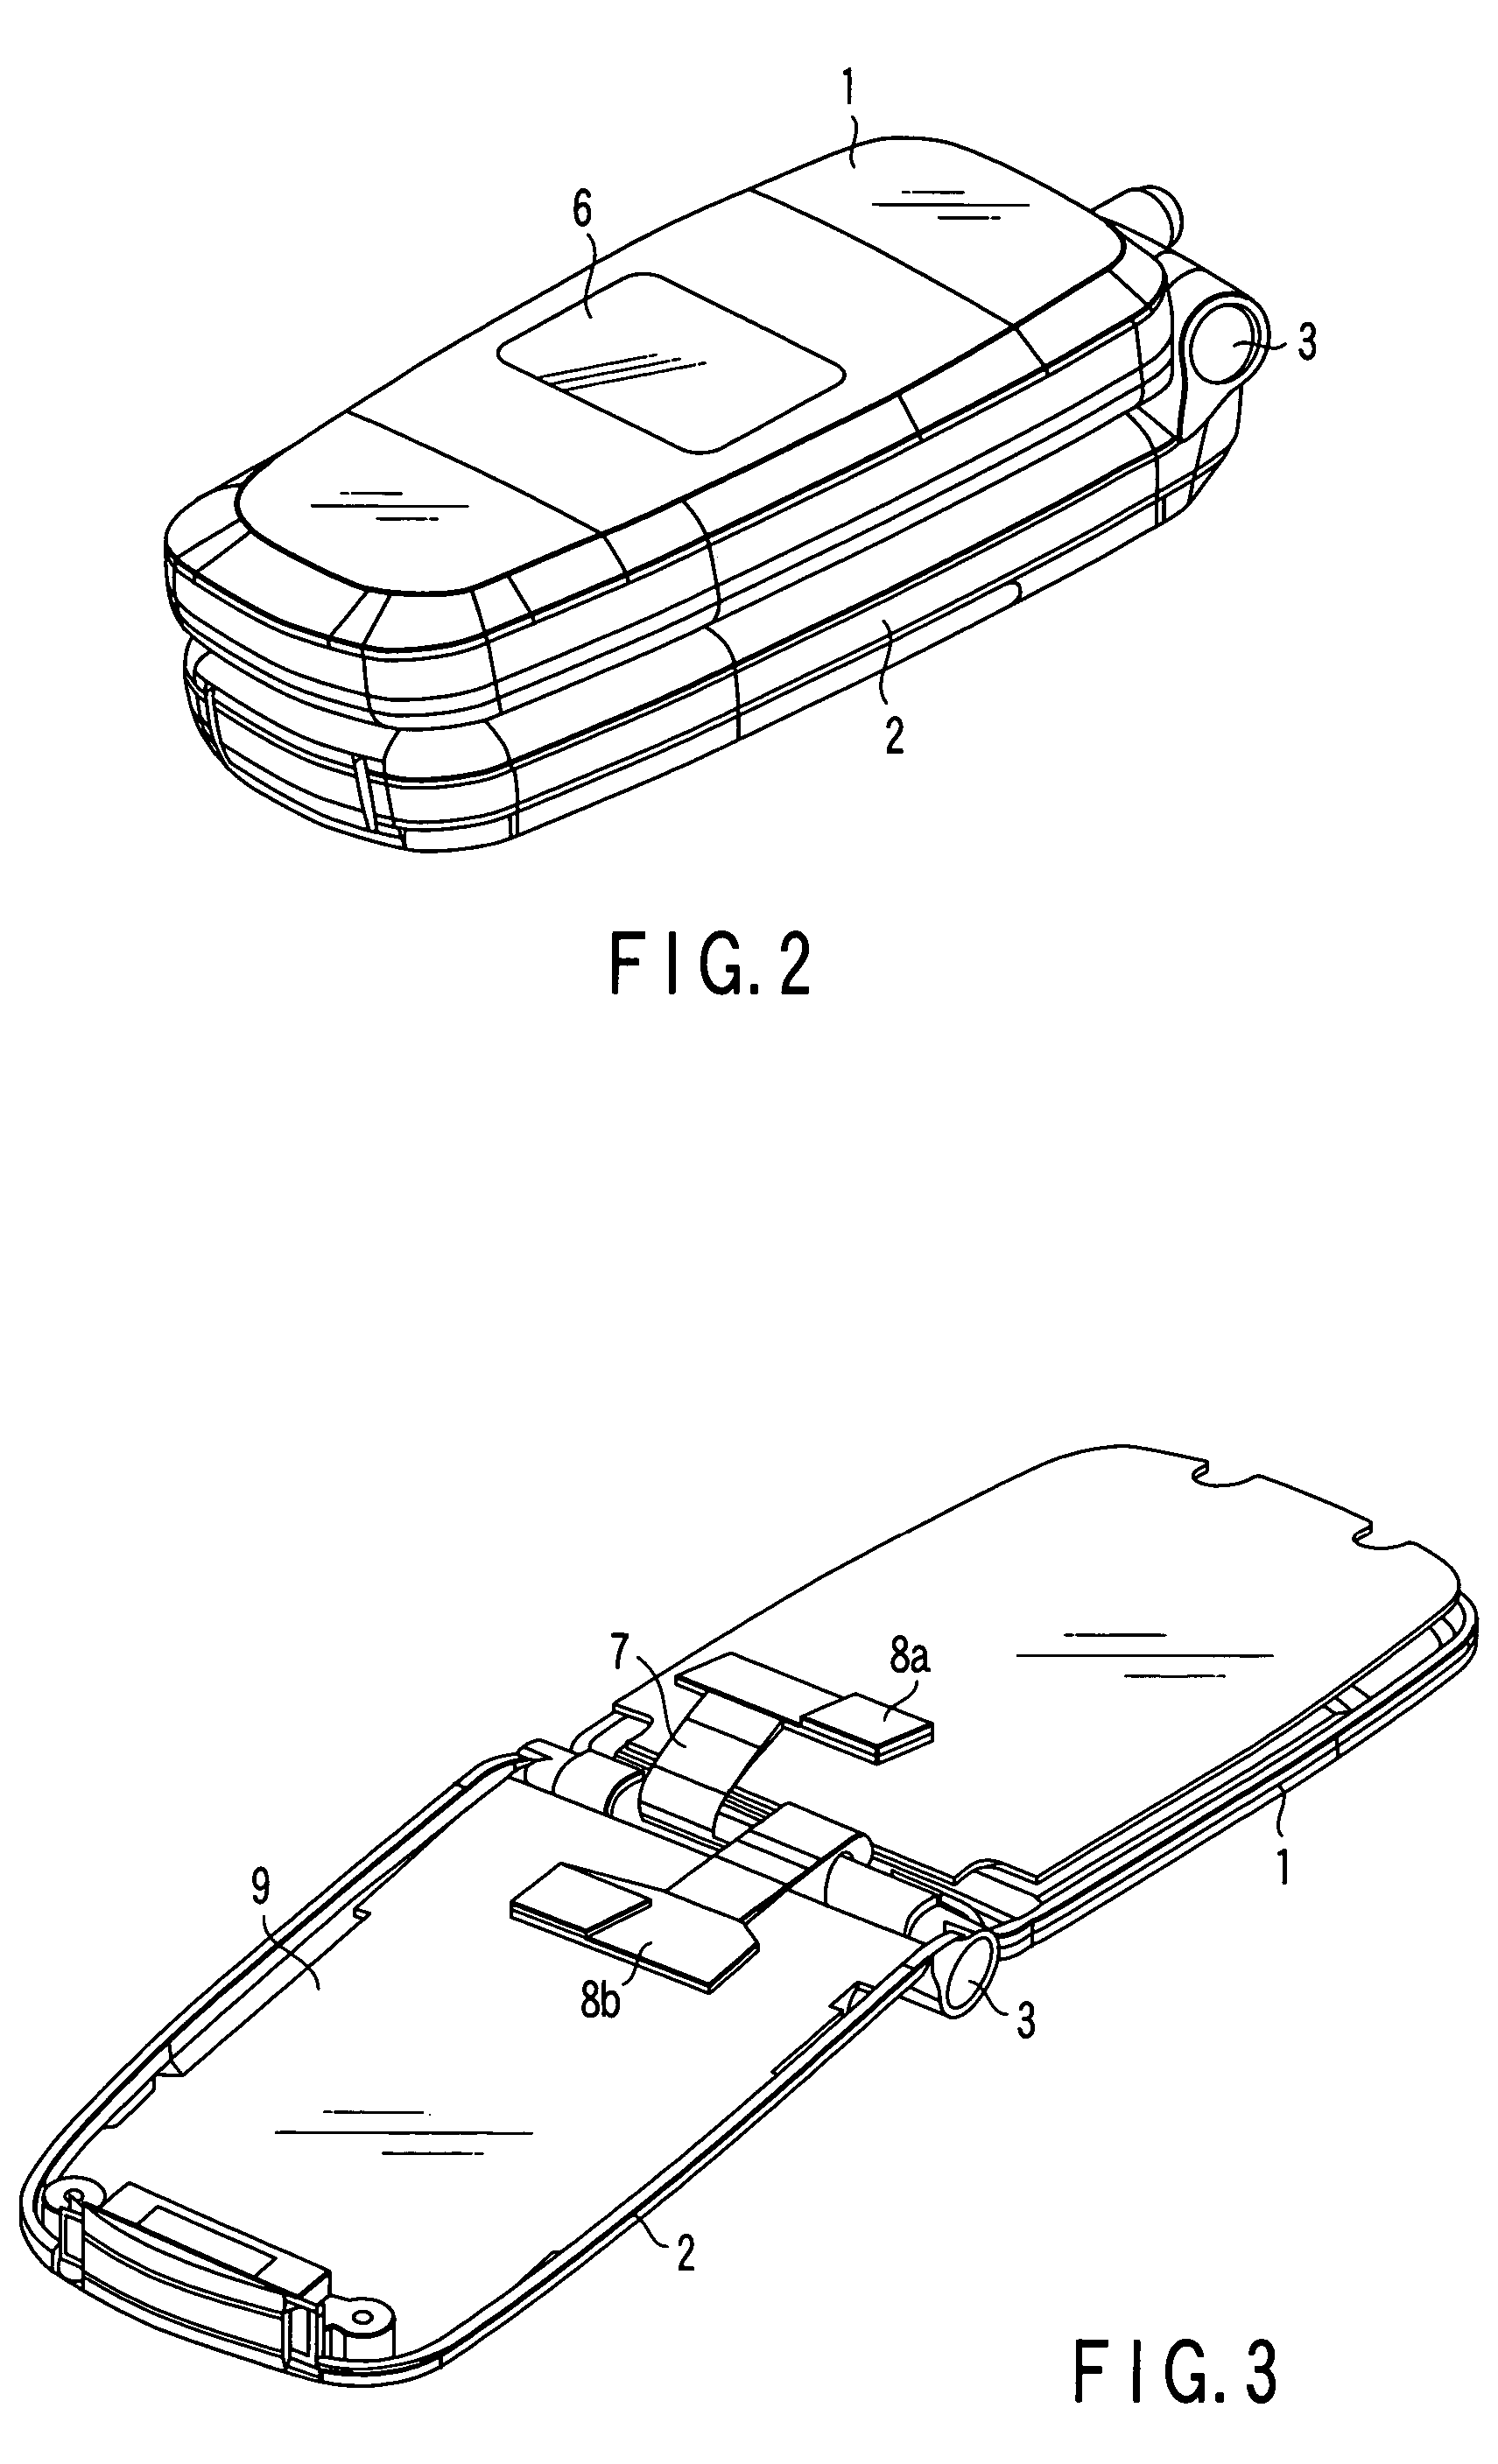 Display device and portable electronic device